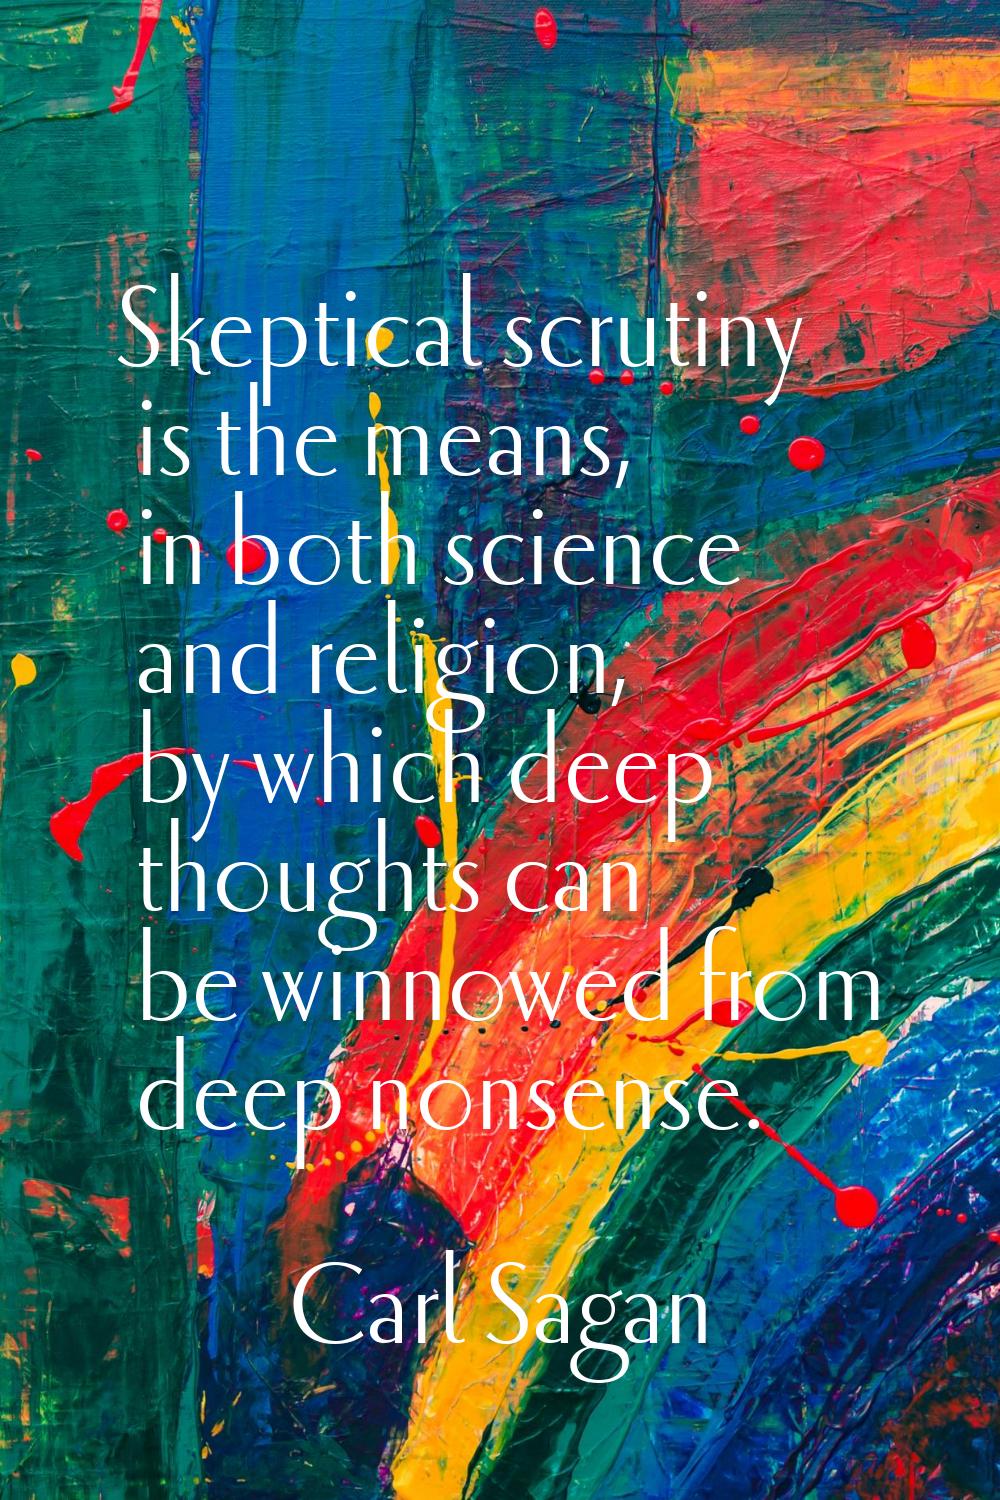 Skeptical scrutiny is the means, in both science and religion, by which deep thoughts can be winnow